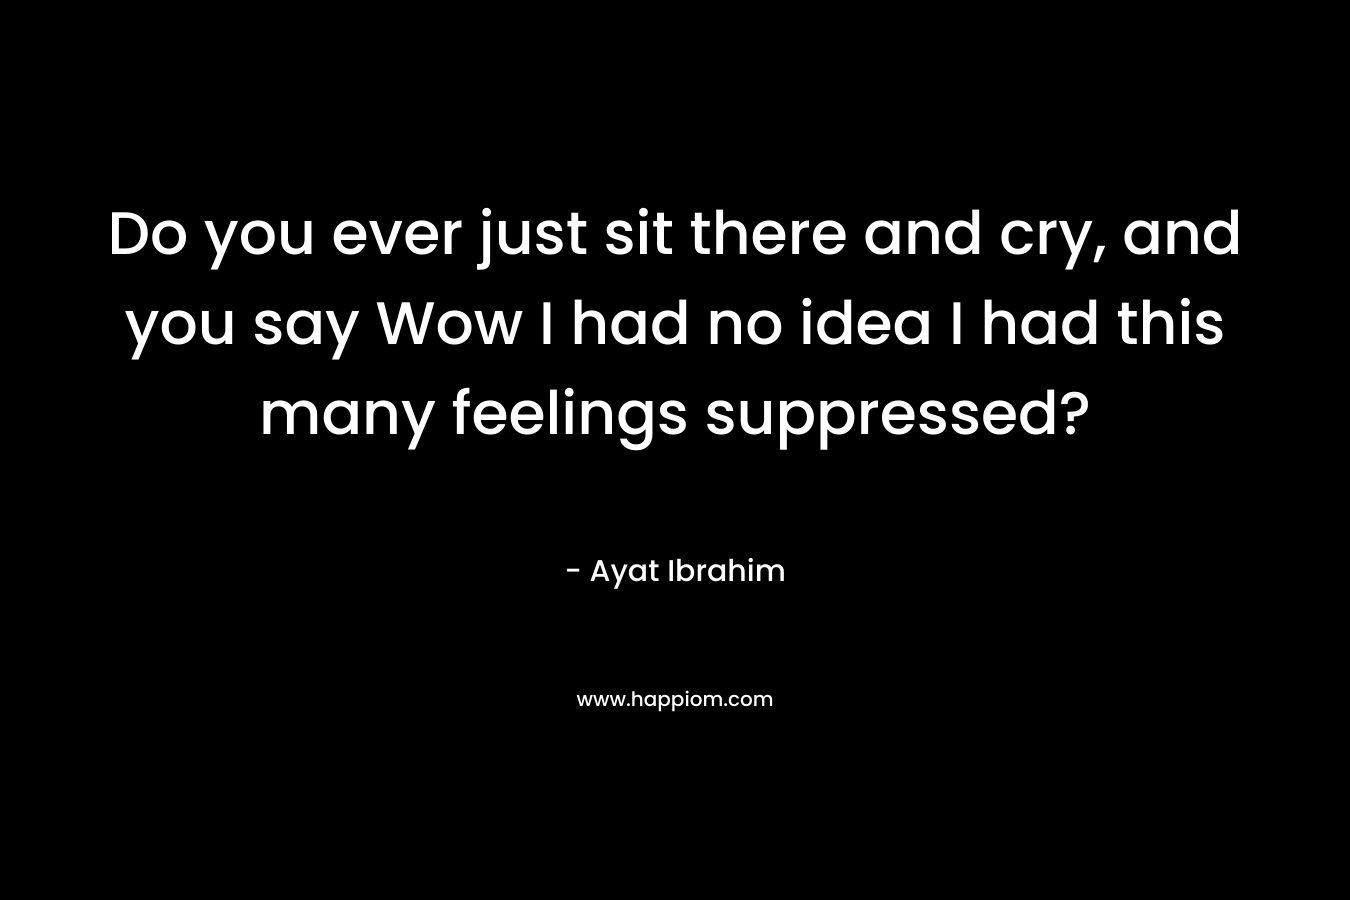 Do you ever just sit there and cry, and you say Wow I had no idea I had this many feelings suppressed? – Ayat Ibrahim